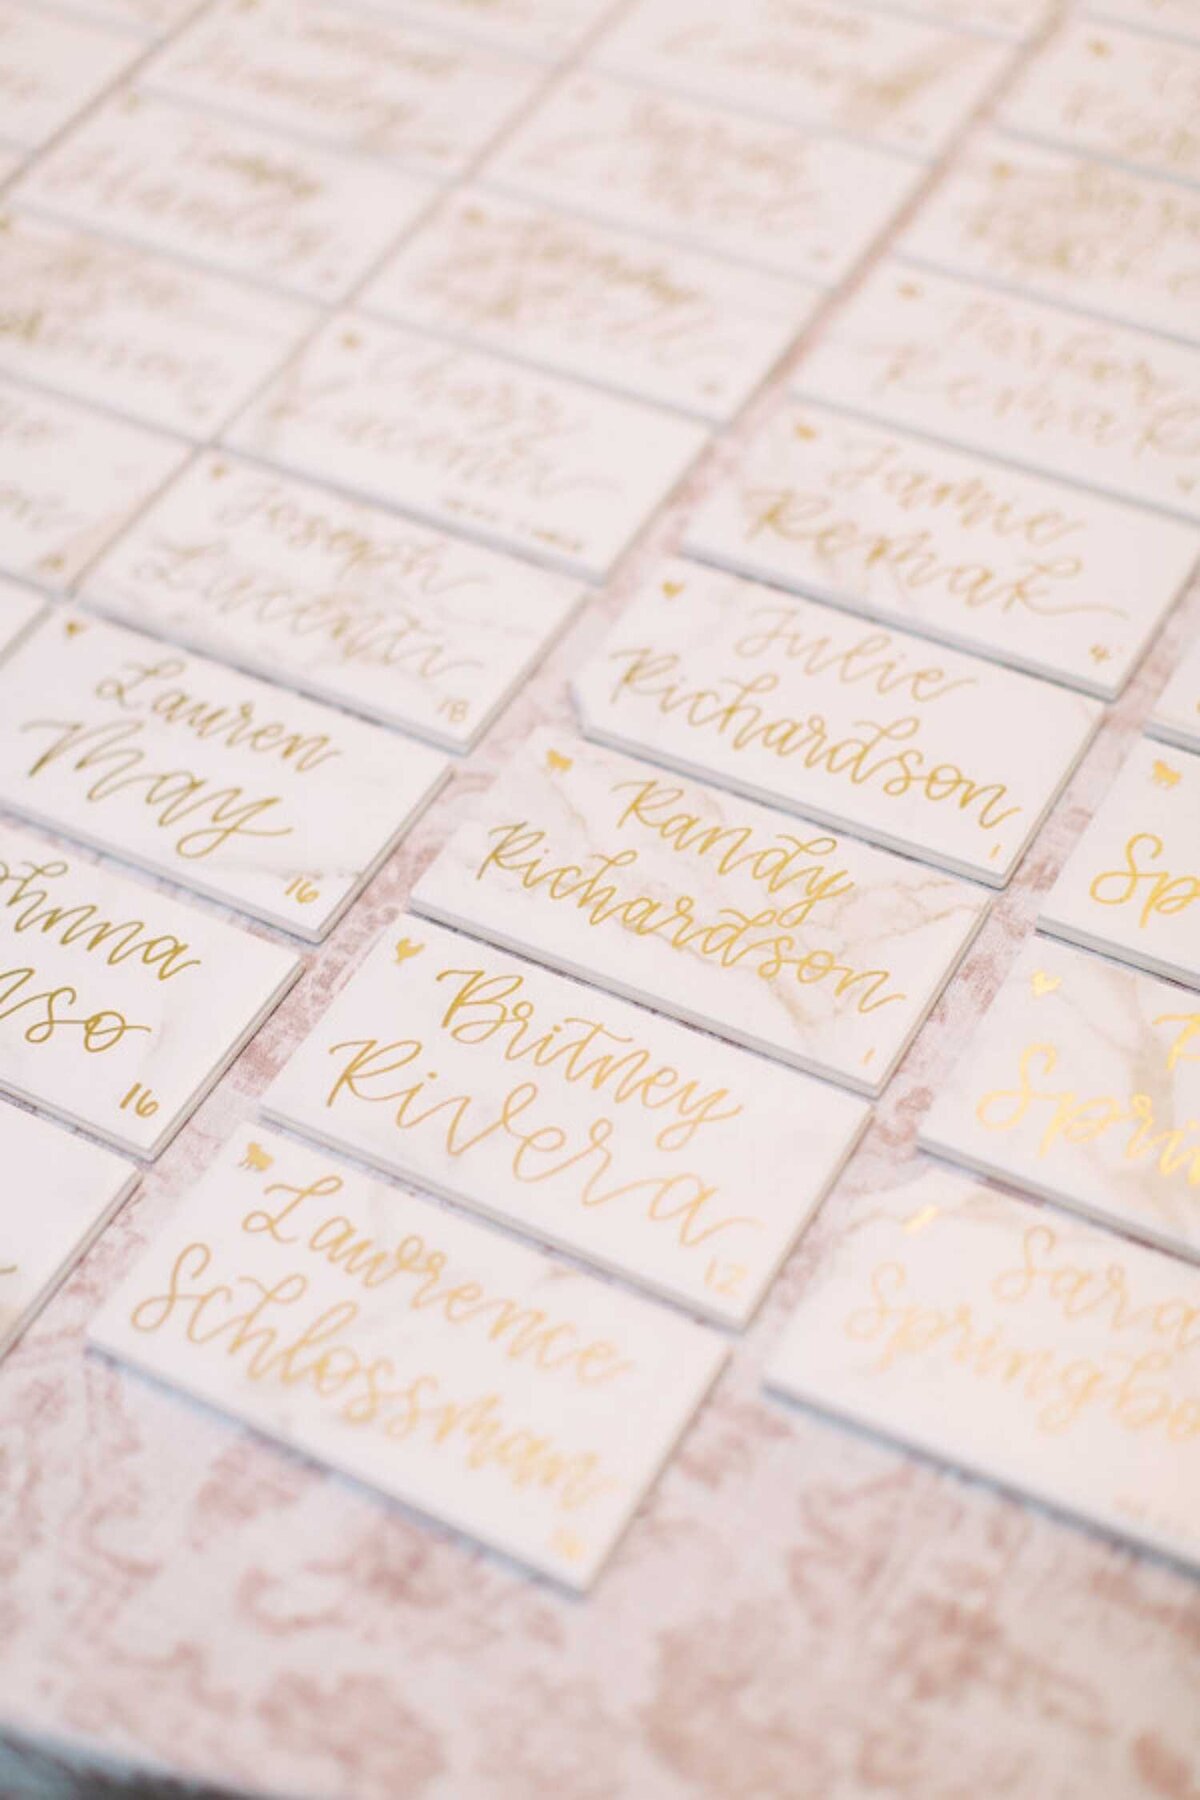 Tile and calligraphy place cards on a floral printed linen at a luxury Chicago outdoor garden wedding.